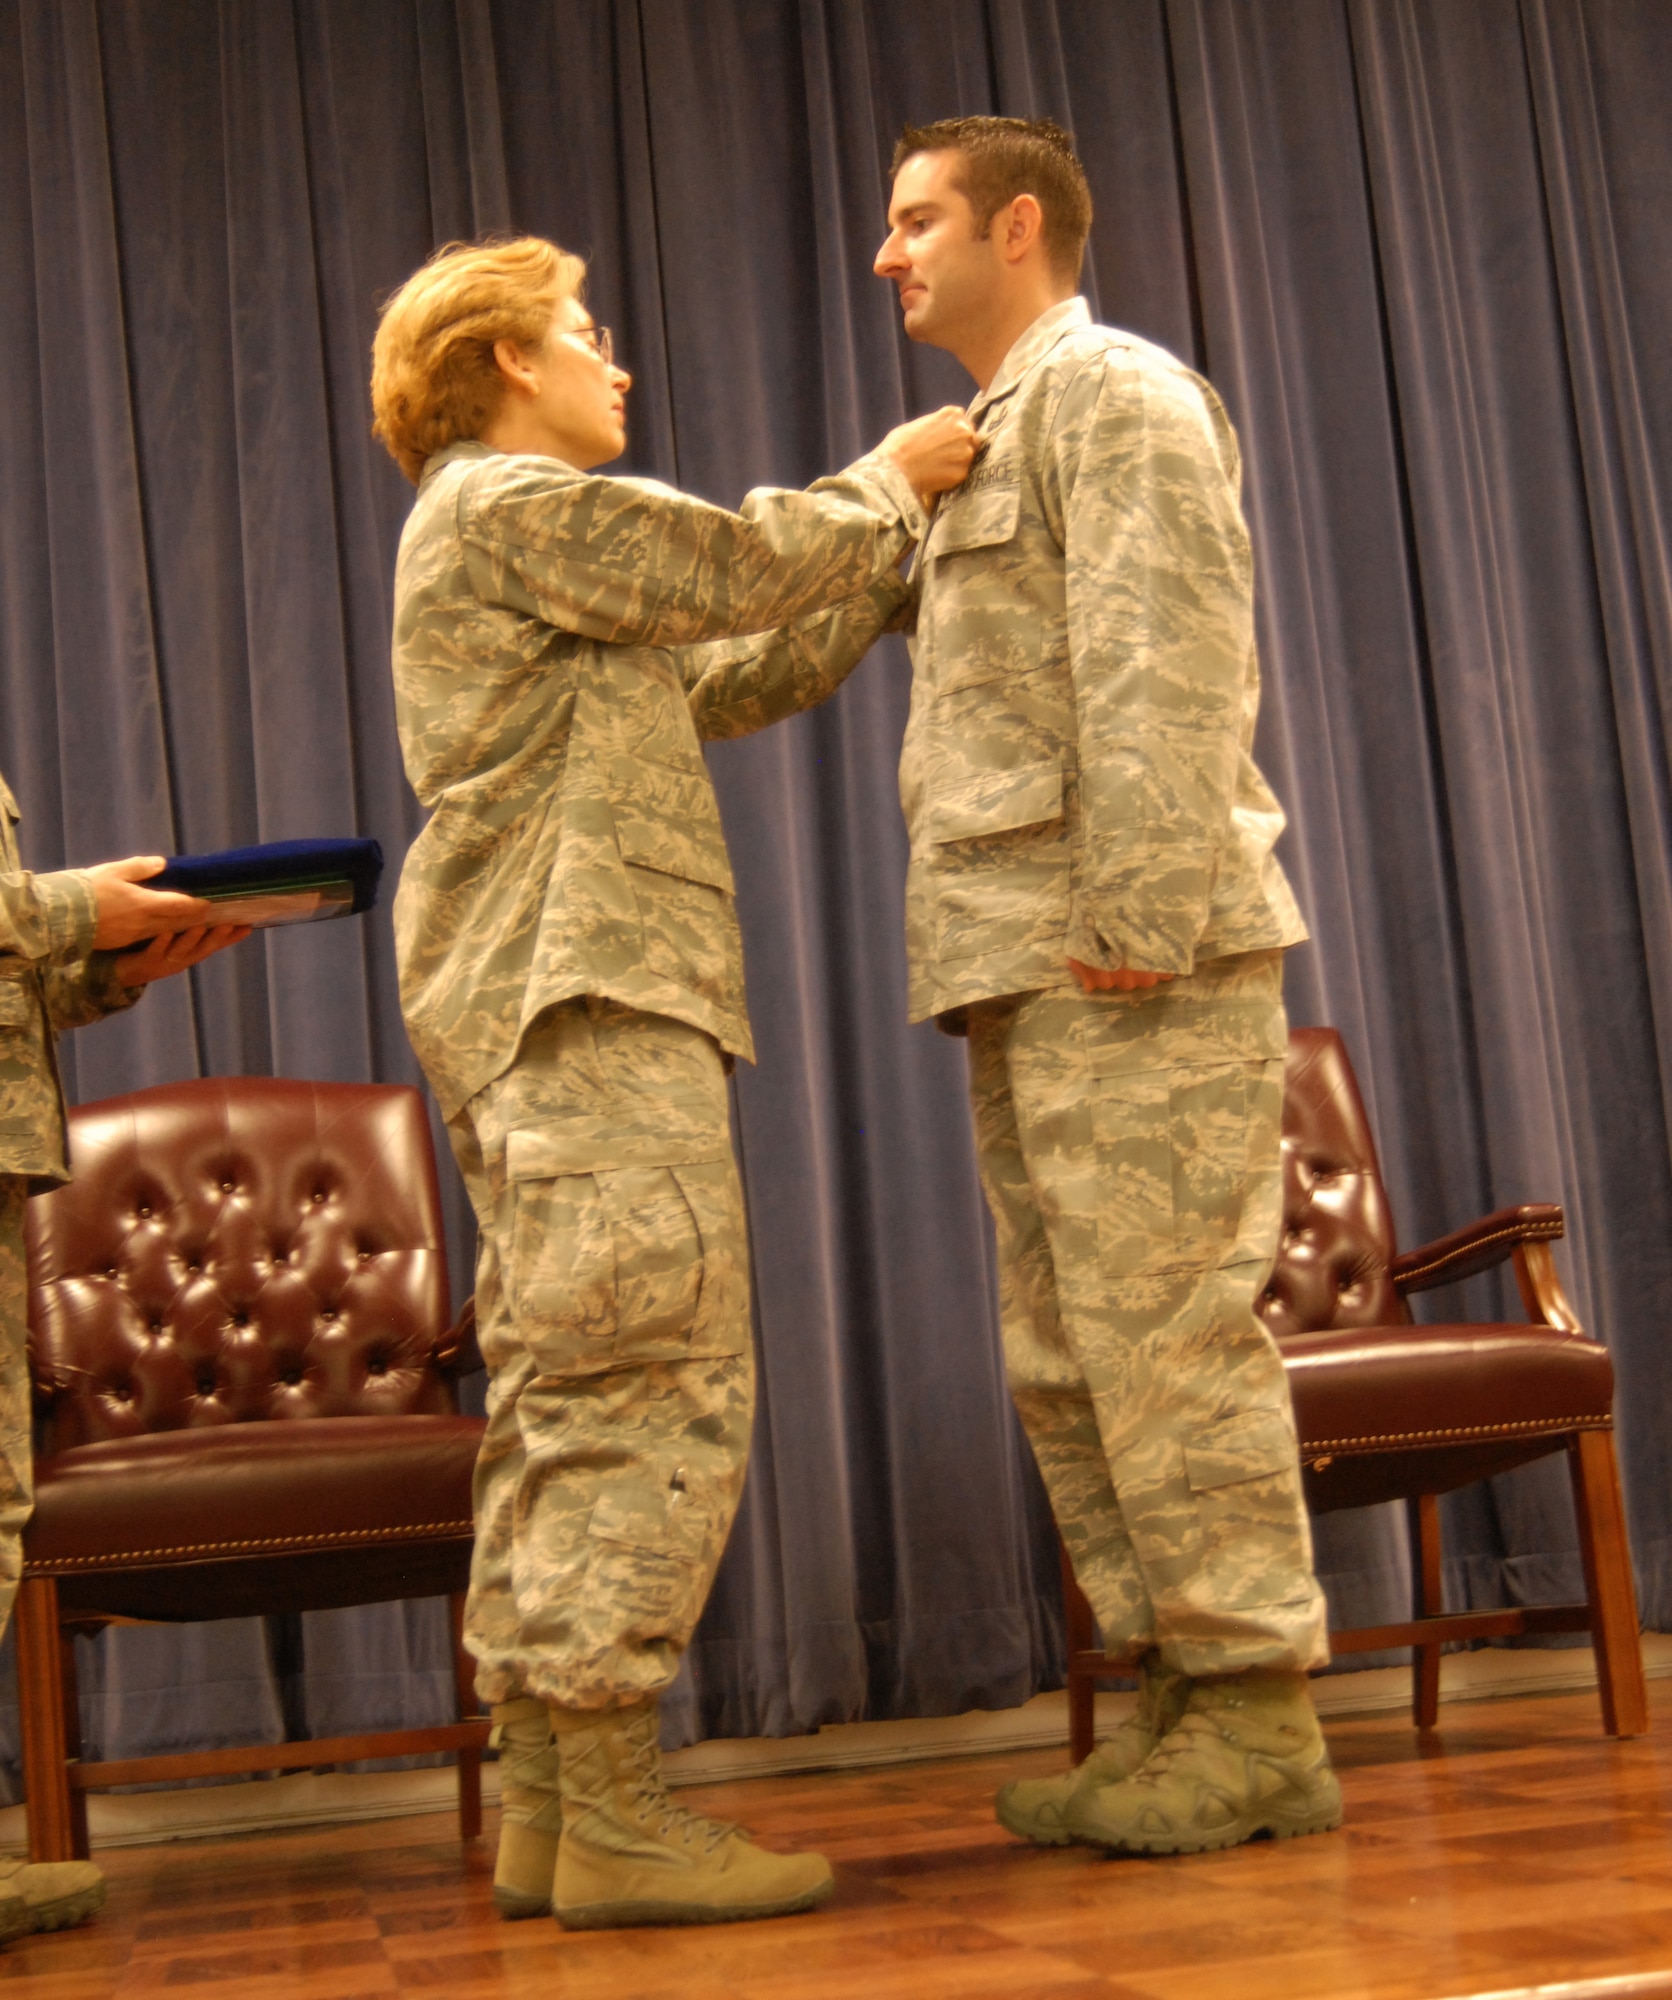 Air Force Brig. Gen. Carol Timmons, assistant adjutant general for air, Delaware National Guard, pins the Bronze Star medal on Air Force Maj. Devin Tomaseski, base civil engineer, 166th Civil Engineer Squadron, 166th Airlift Wing, Delaware Air National Guard, at a ceremony held at 166th AW HQ, New Castle ANG Base, New Castle, Del. on June 20, 2014. Tomaseski distinguished himself by exceptionally meritorious service while deployed in support of Operation Enduring Freedom in Afghanistan from 2011 to 2012. This is the third Bronze Star medal awarded to Tomaseski.  (U.S. Air National Guard photo by Tech. Sgt. Benjamin Matwey)